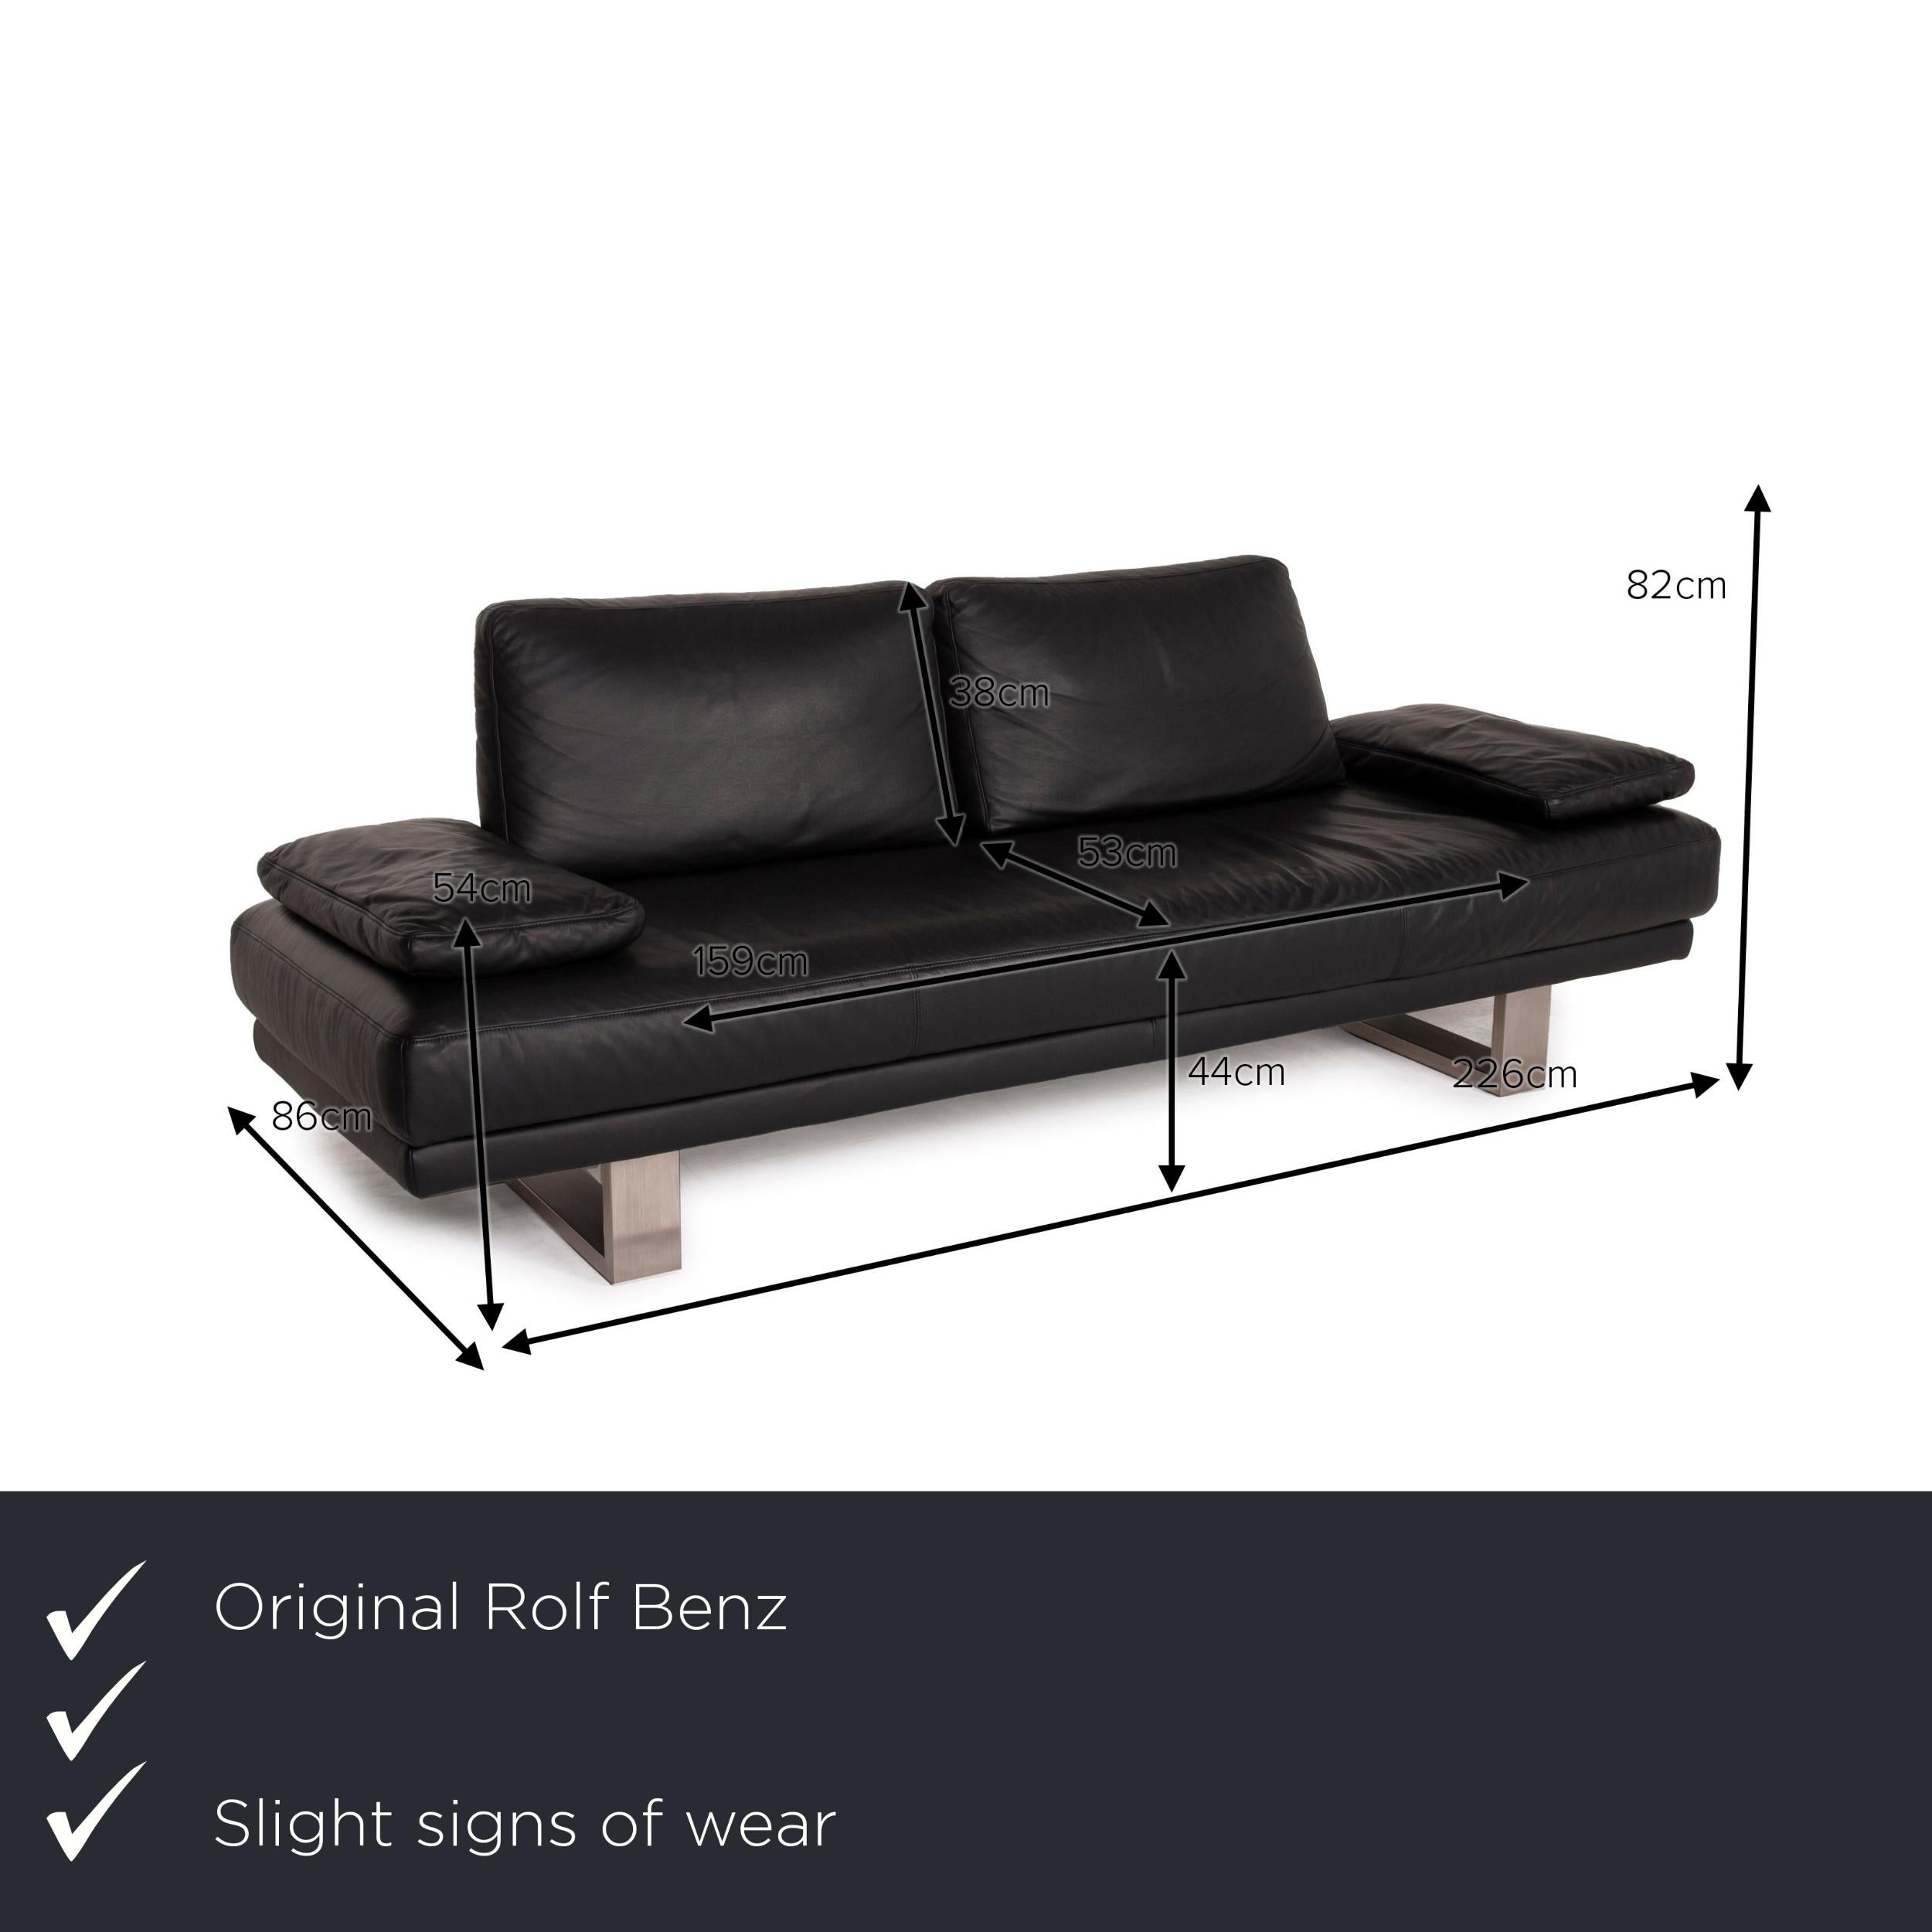 We present to you a Rolf Benz 6600 leather sofa black three-seater.
 
 

 Product measurements in centimeters:
 

Depth: 86
Width: 226
Height: 82
Seat height: 44
Rest height: 54
Seat depth: 53
Seat width: 159
Back height: 38.